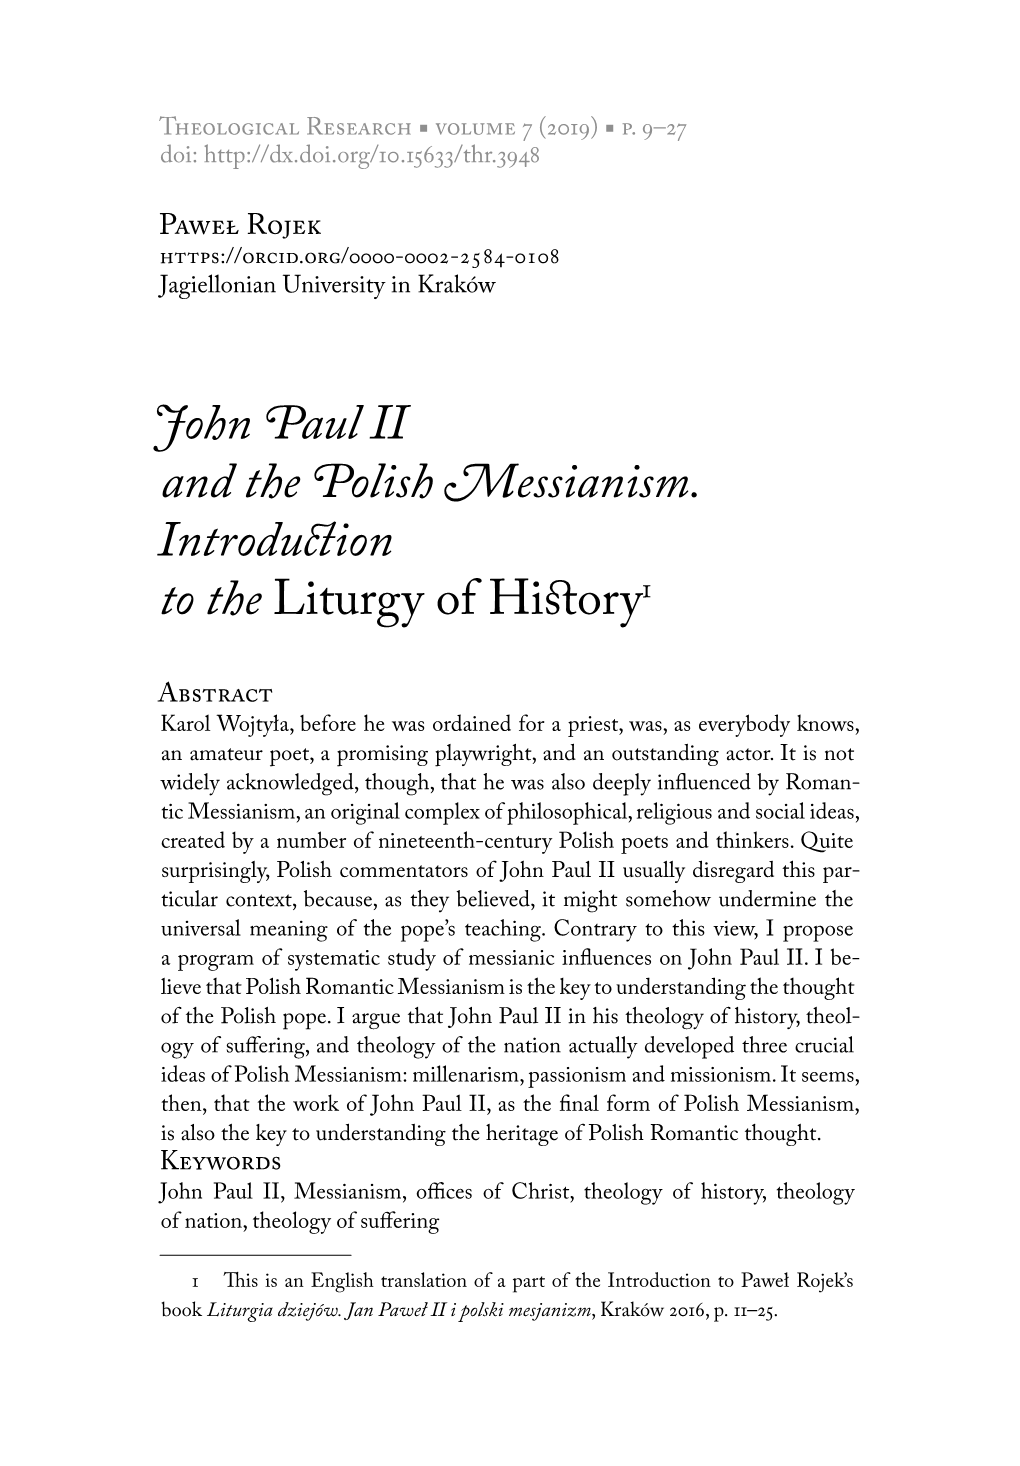 John Paul II and the Polish Messianism. Introduction to the Liturgy of History1